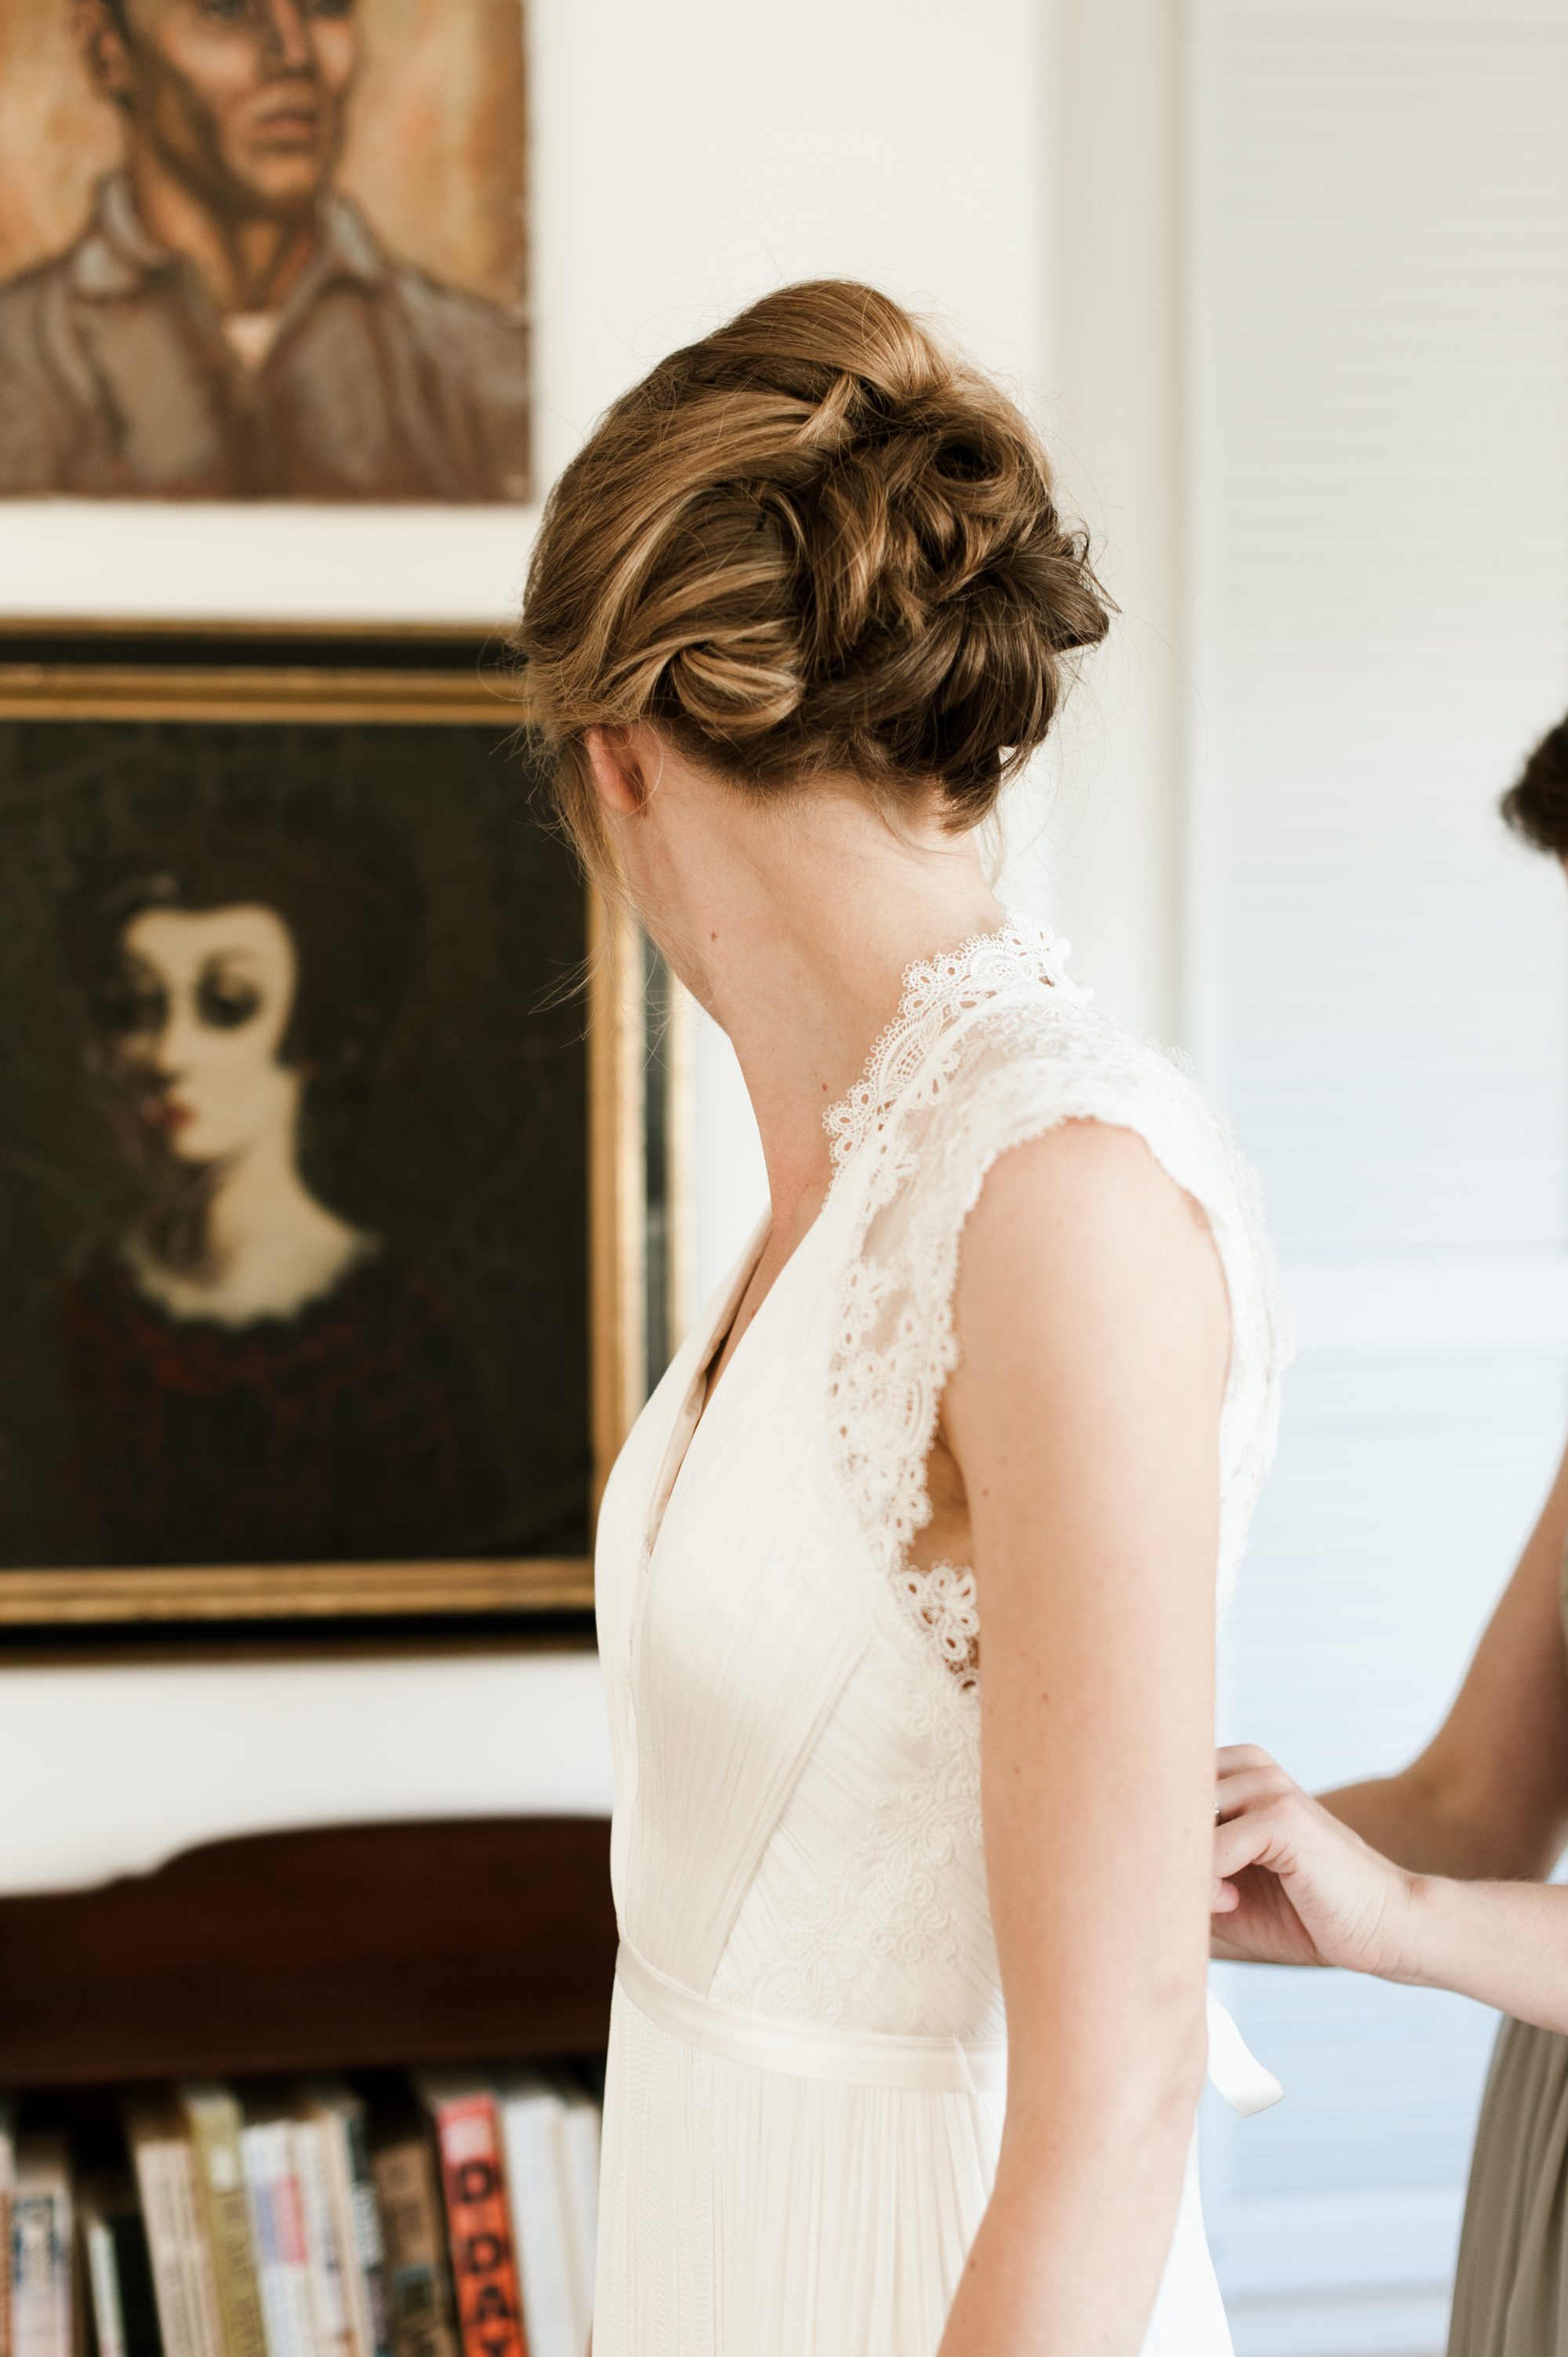 The bride gets help putting on her dress at the Portland Mayor's Mansion. By Laurelhurst Park wedding photographer Briana Morrison